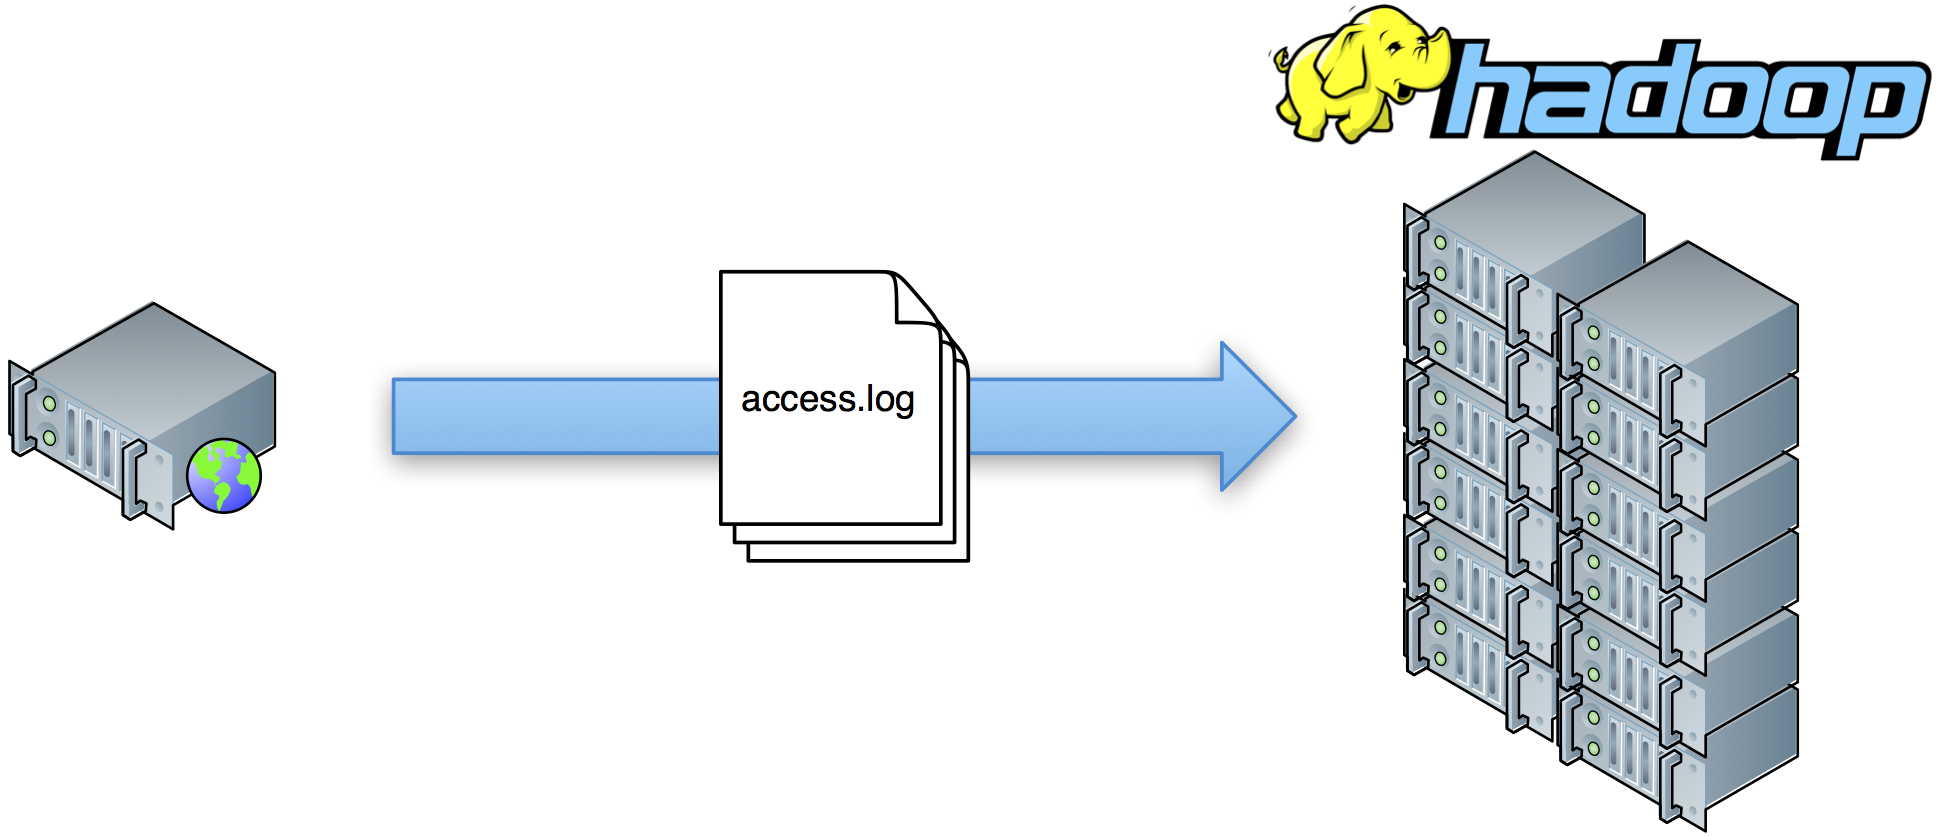 Traditional method of collecting clickstream data on Hadoop